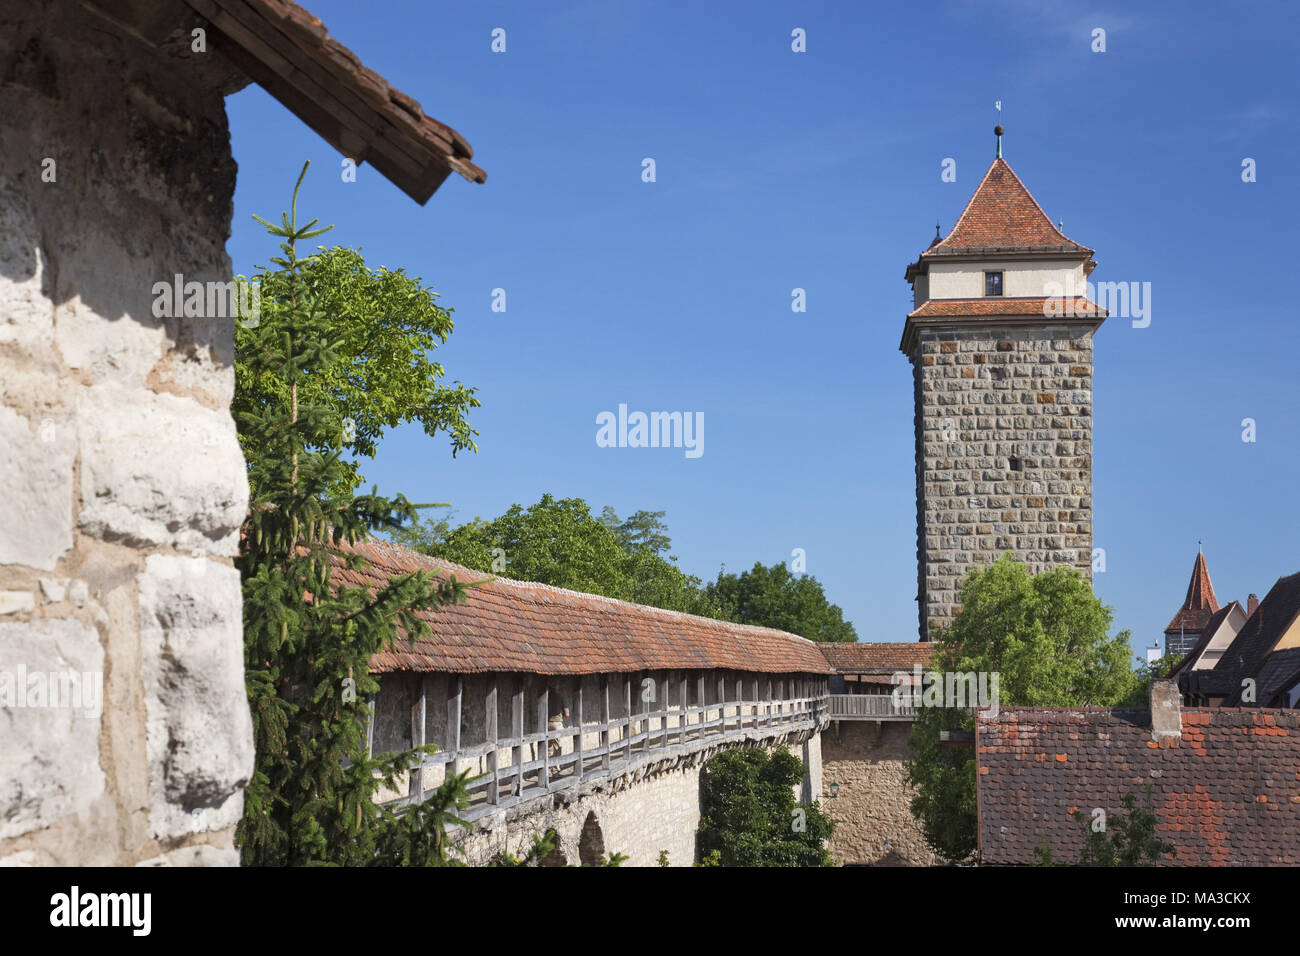 city-wall-with-gallow-gate-rothenburg-ob-der-tauber-central-franconia-franconia-bavaria-south-germany-germany-MA3CKX.jpg